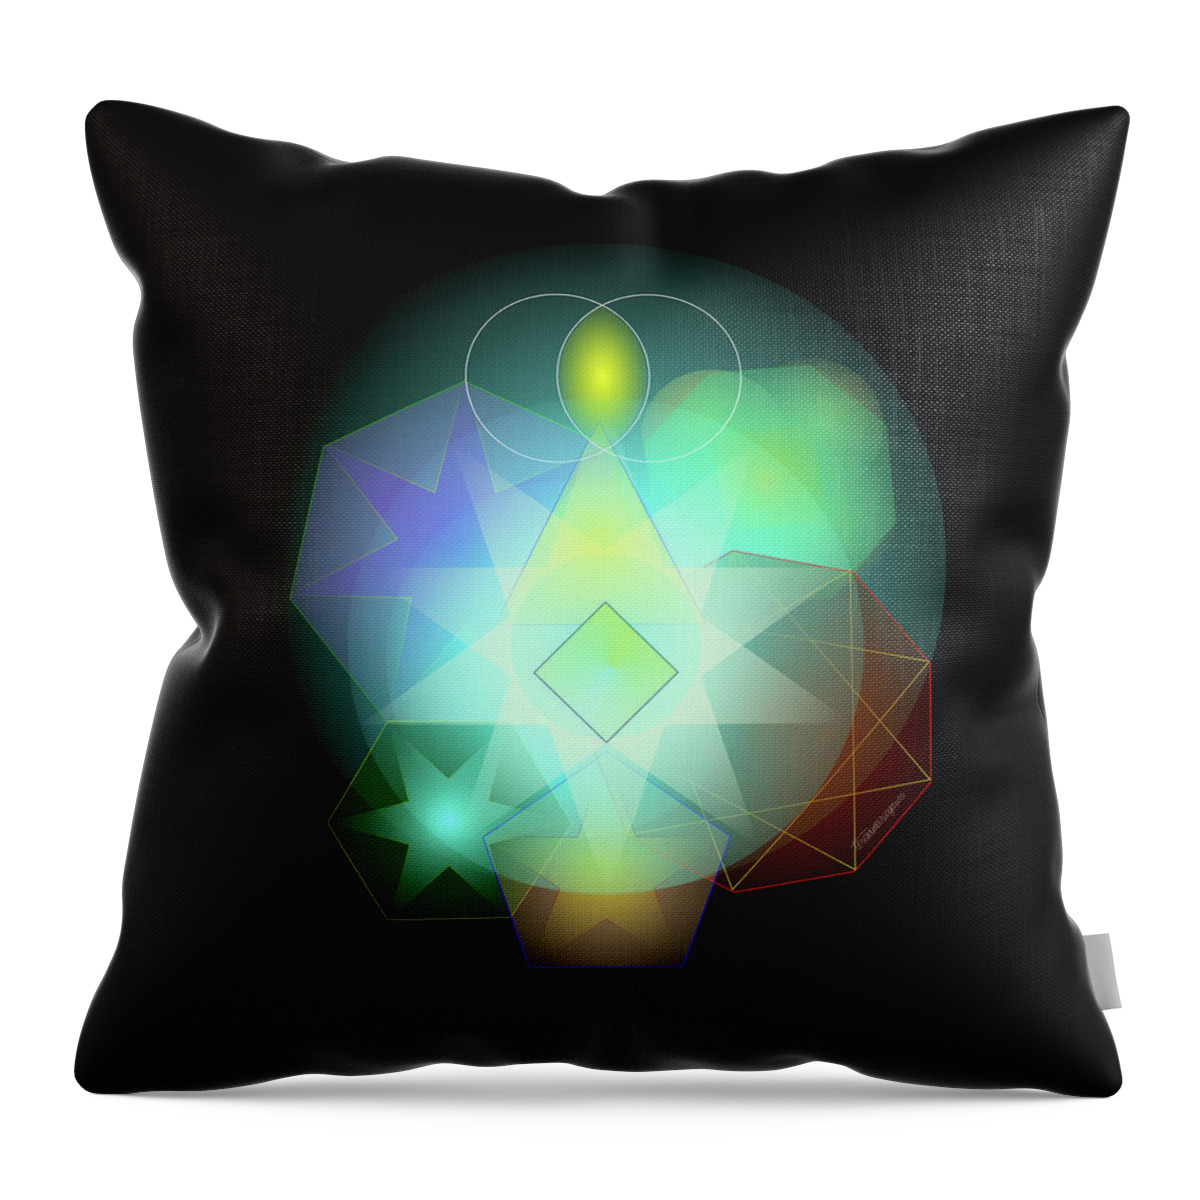 Sacred Numbers Throw Pillow featuring the digital art Sacred Numbers by Teresamarie Yawn